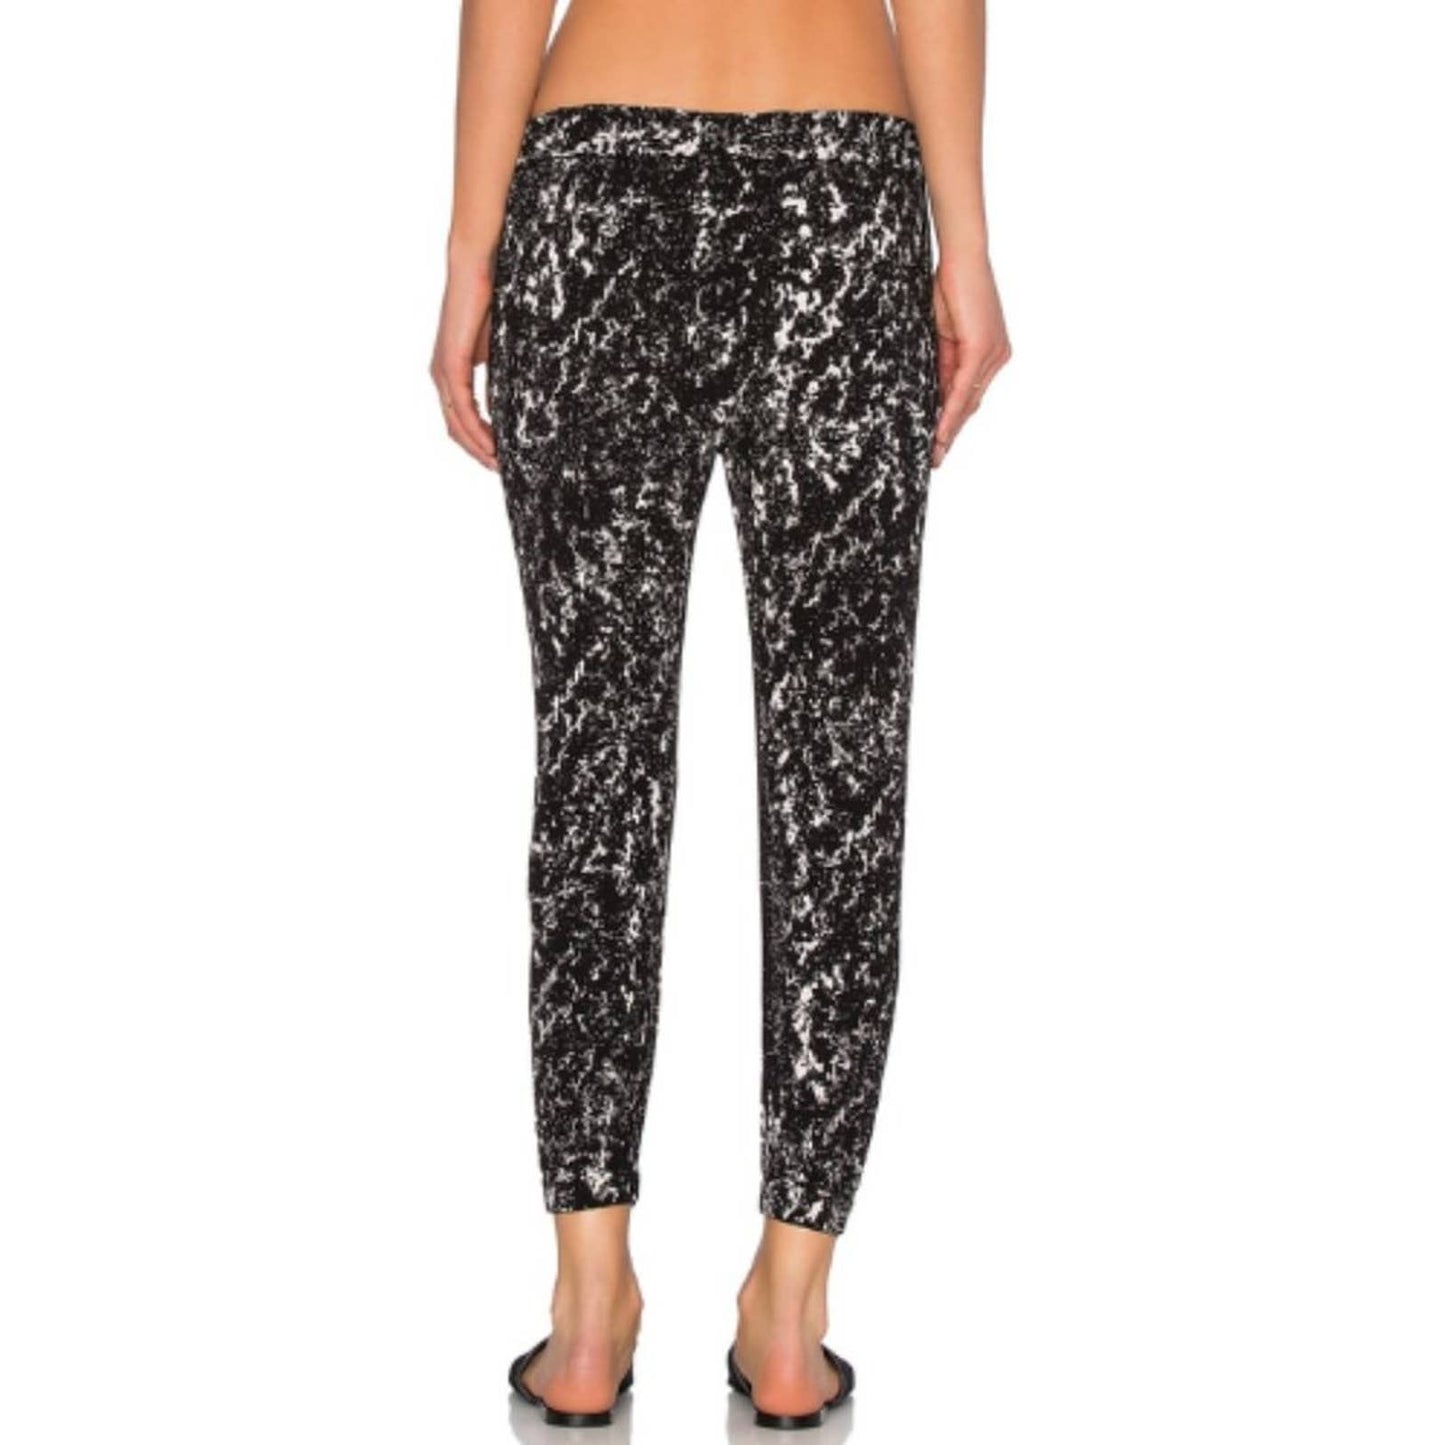 Enza Costa Lounge Pant in Chalk Print NWOT Size XS